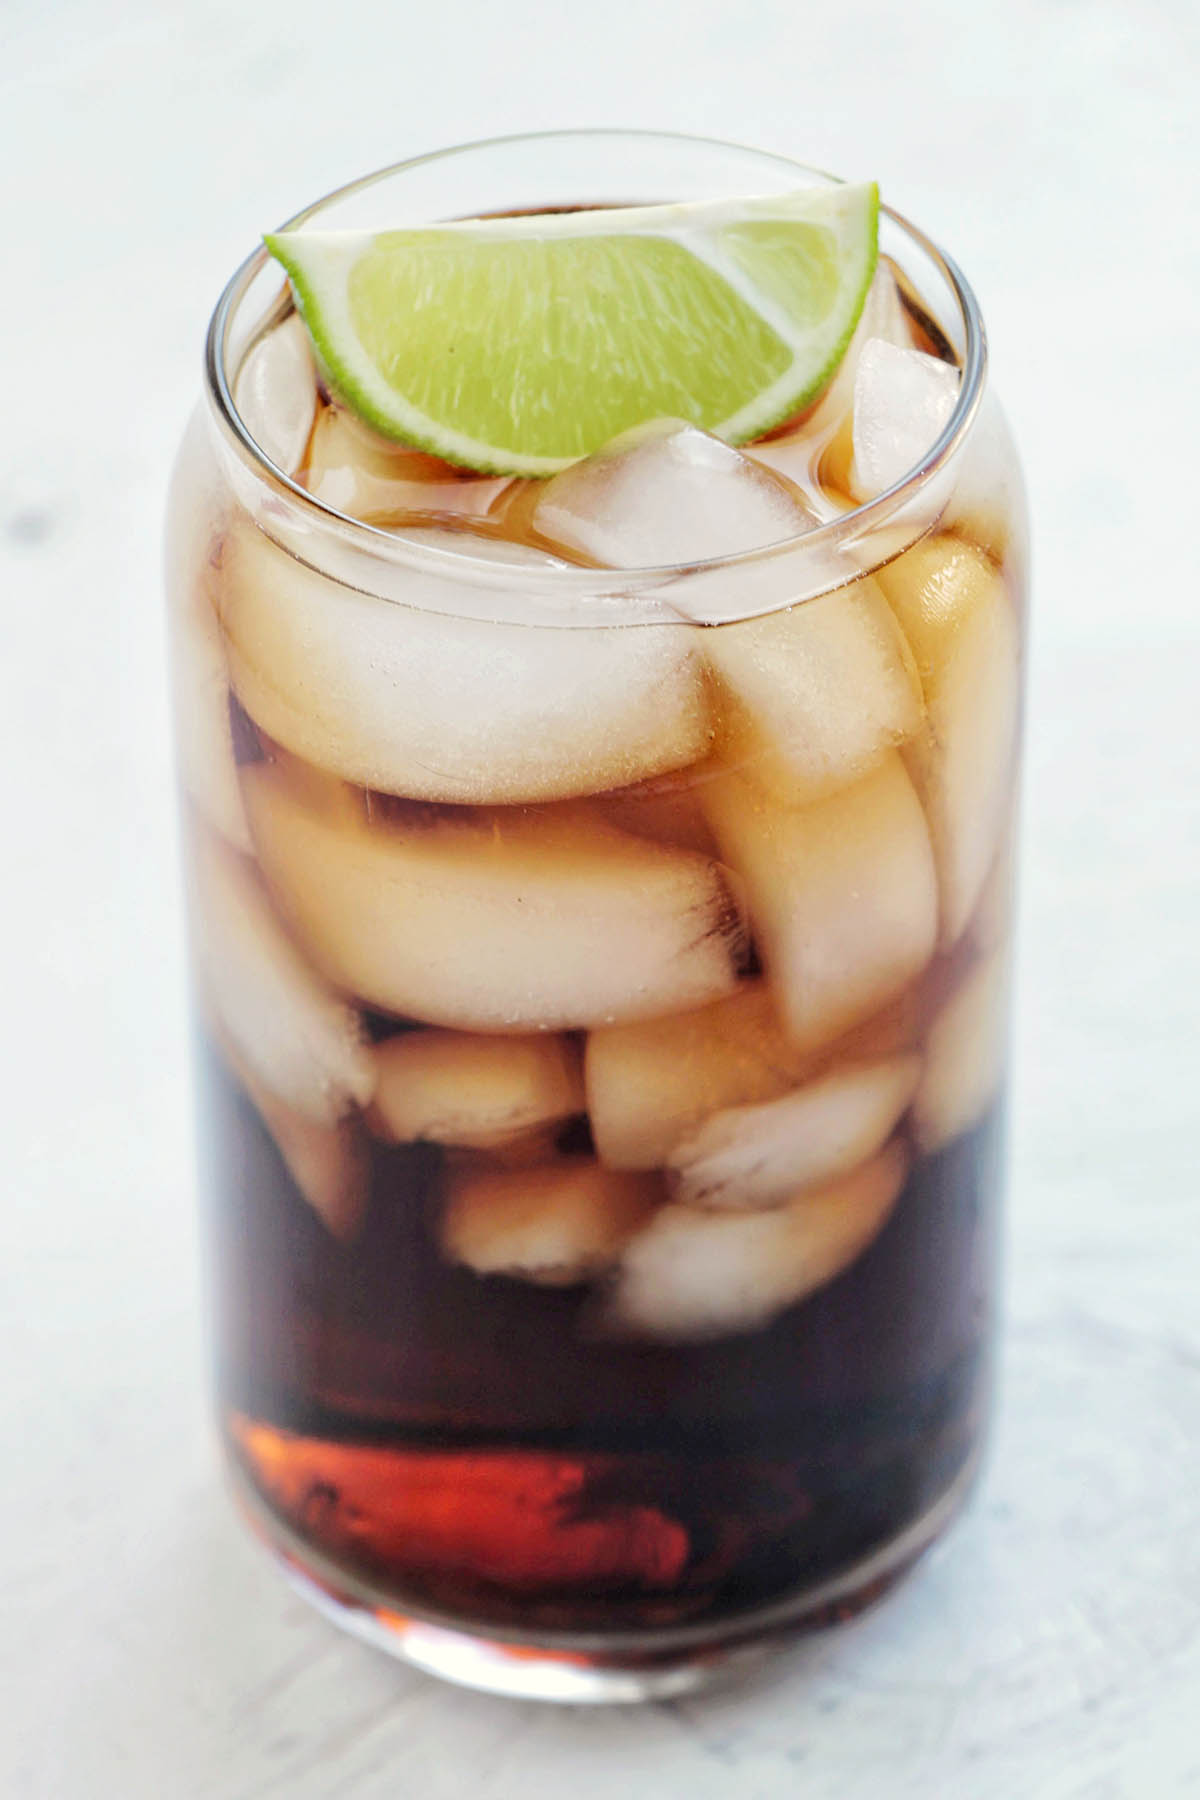 rum and coke drink with lime garnish.